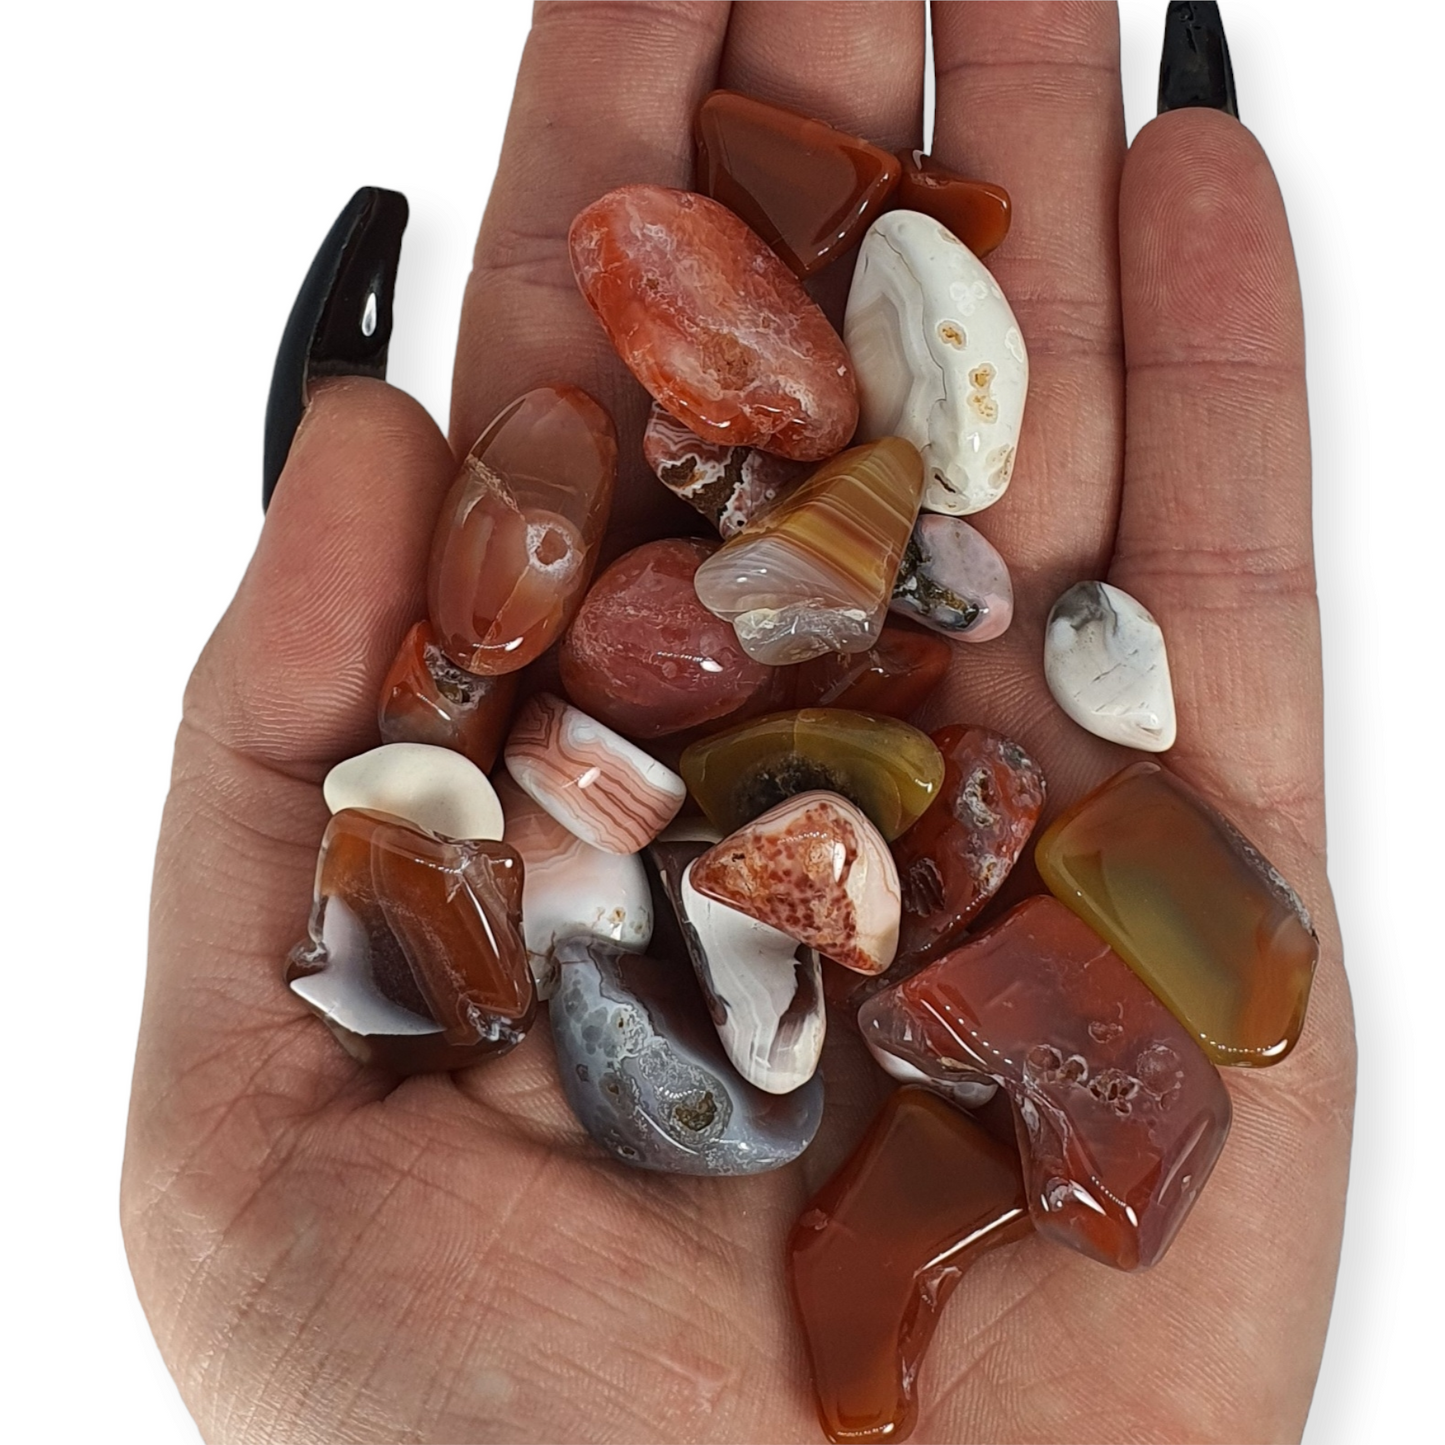 Crystals - Agate (Carnelian) Tumbled Stone (Extra Small Mix)